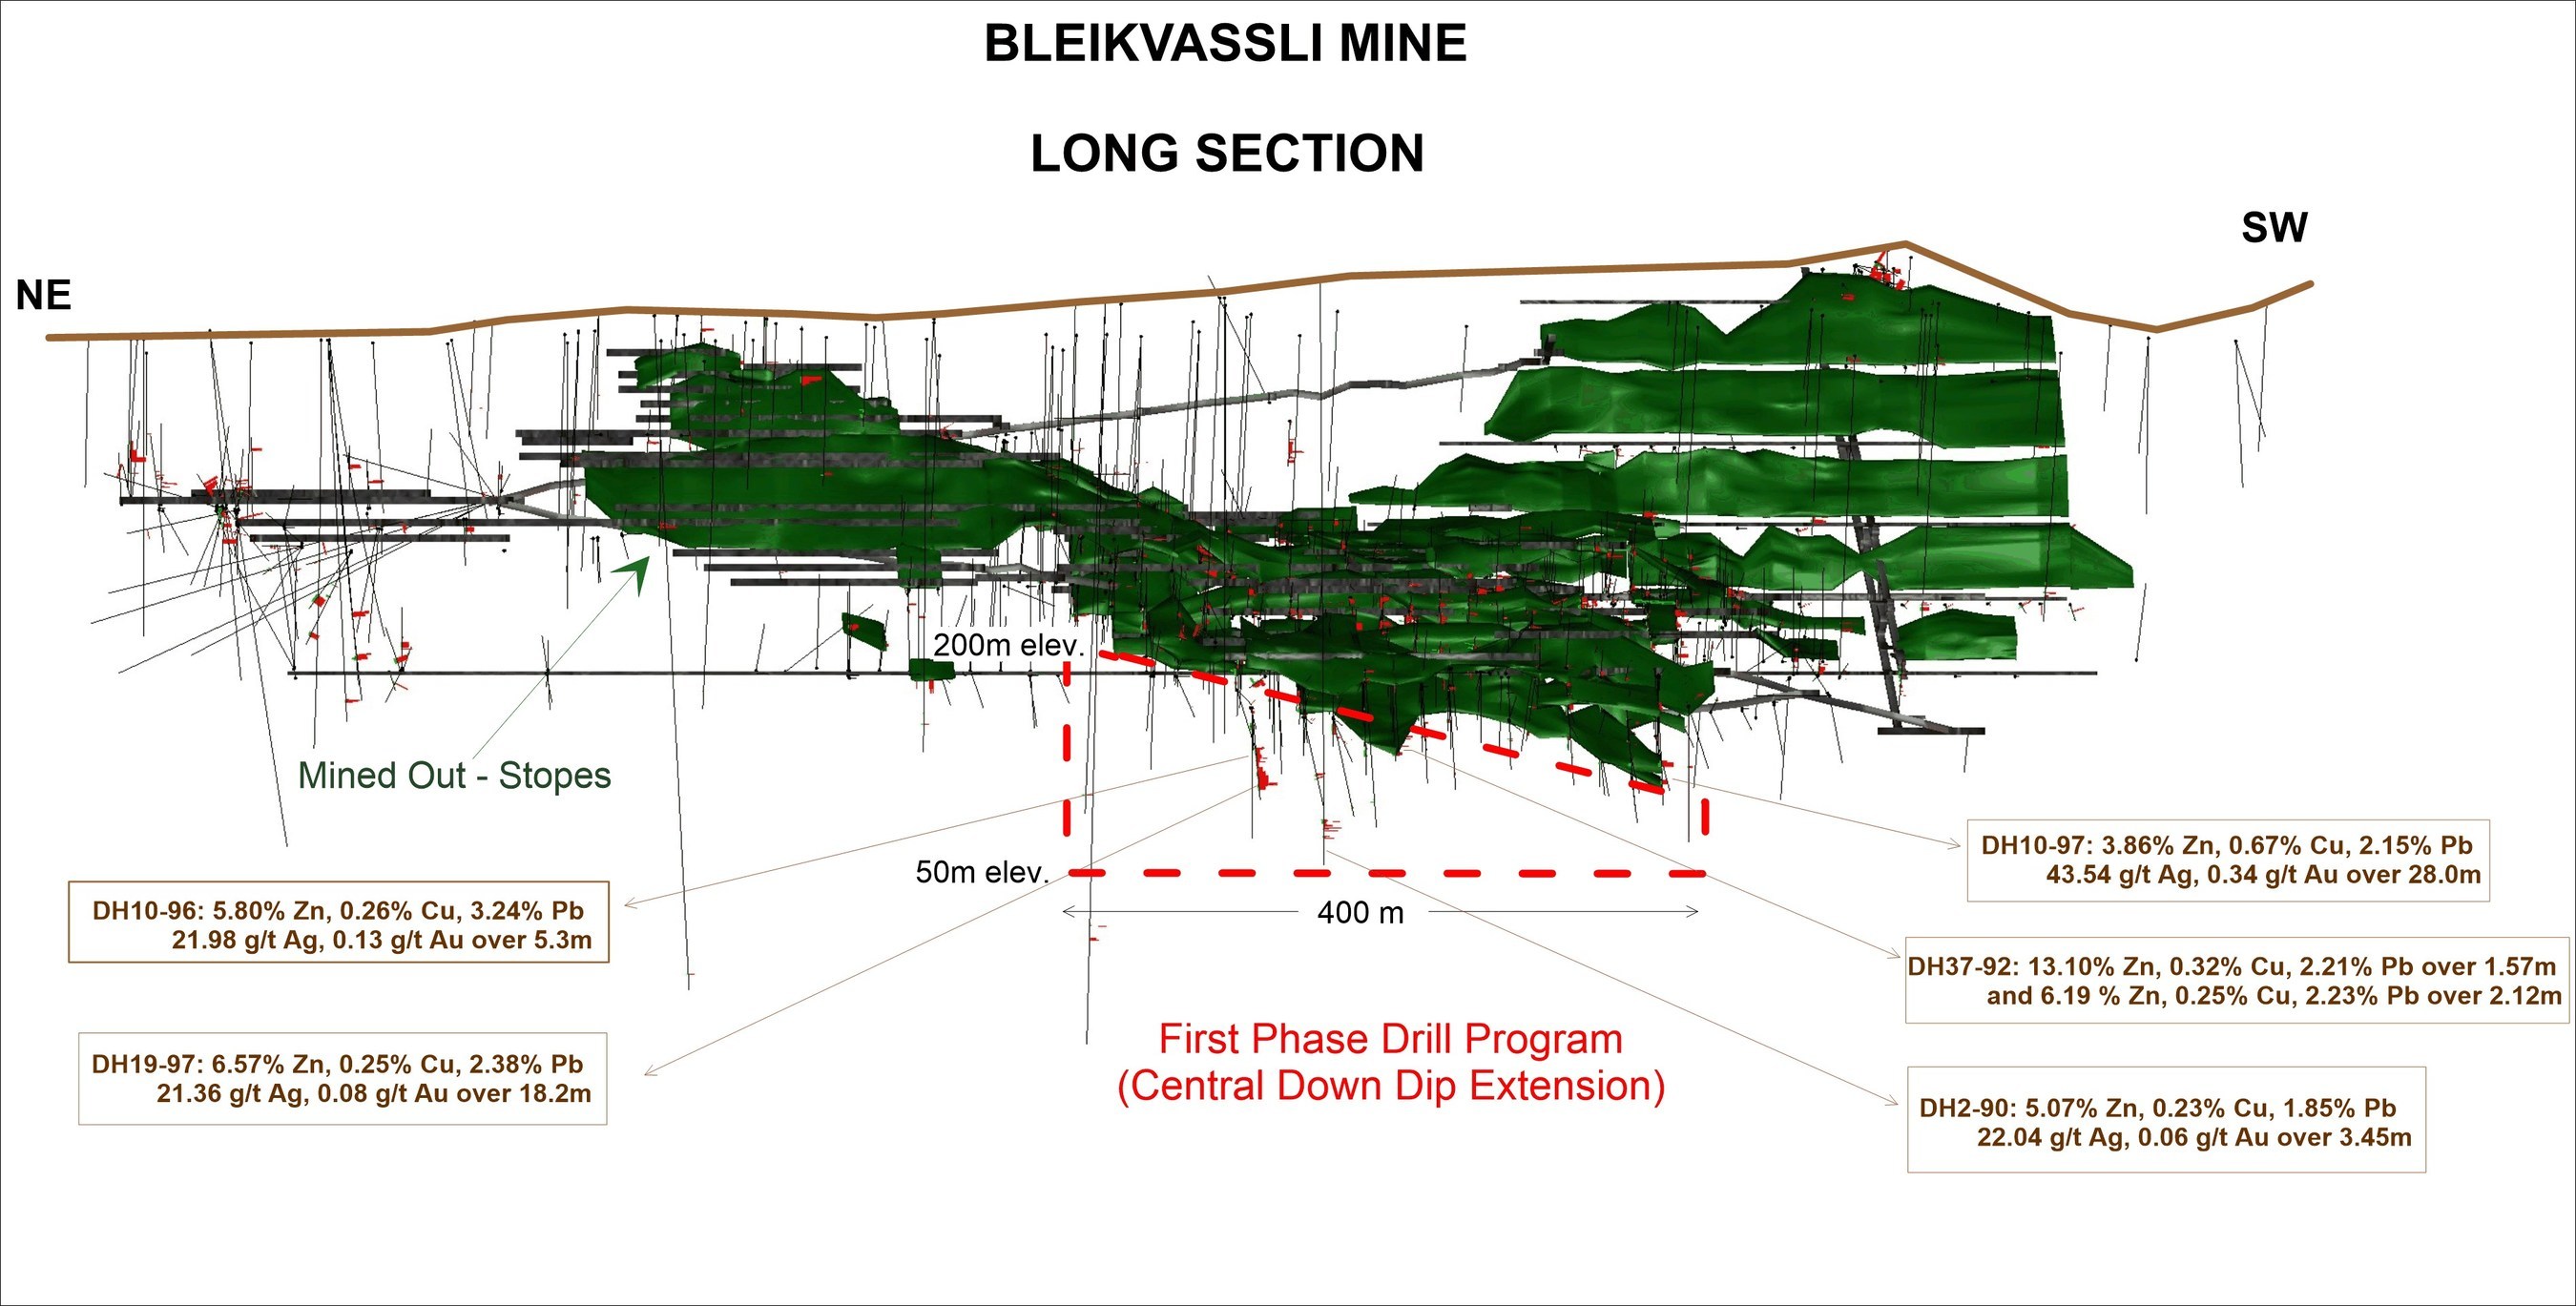 Figure 2. – Bleikvassli mine long section. First phase drill program at the central down dip extension. (CNW Group/Norra Metals Corp.)